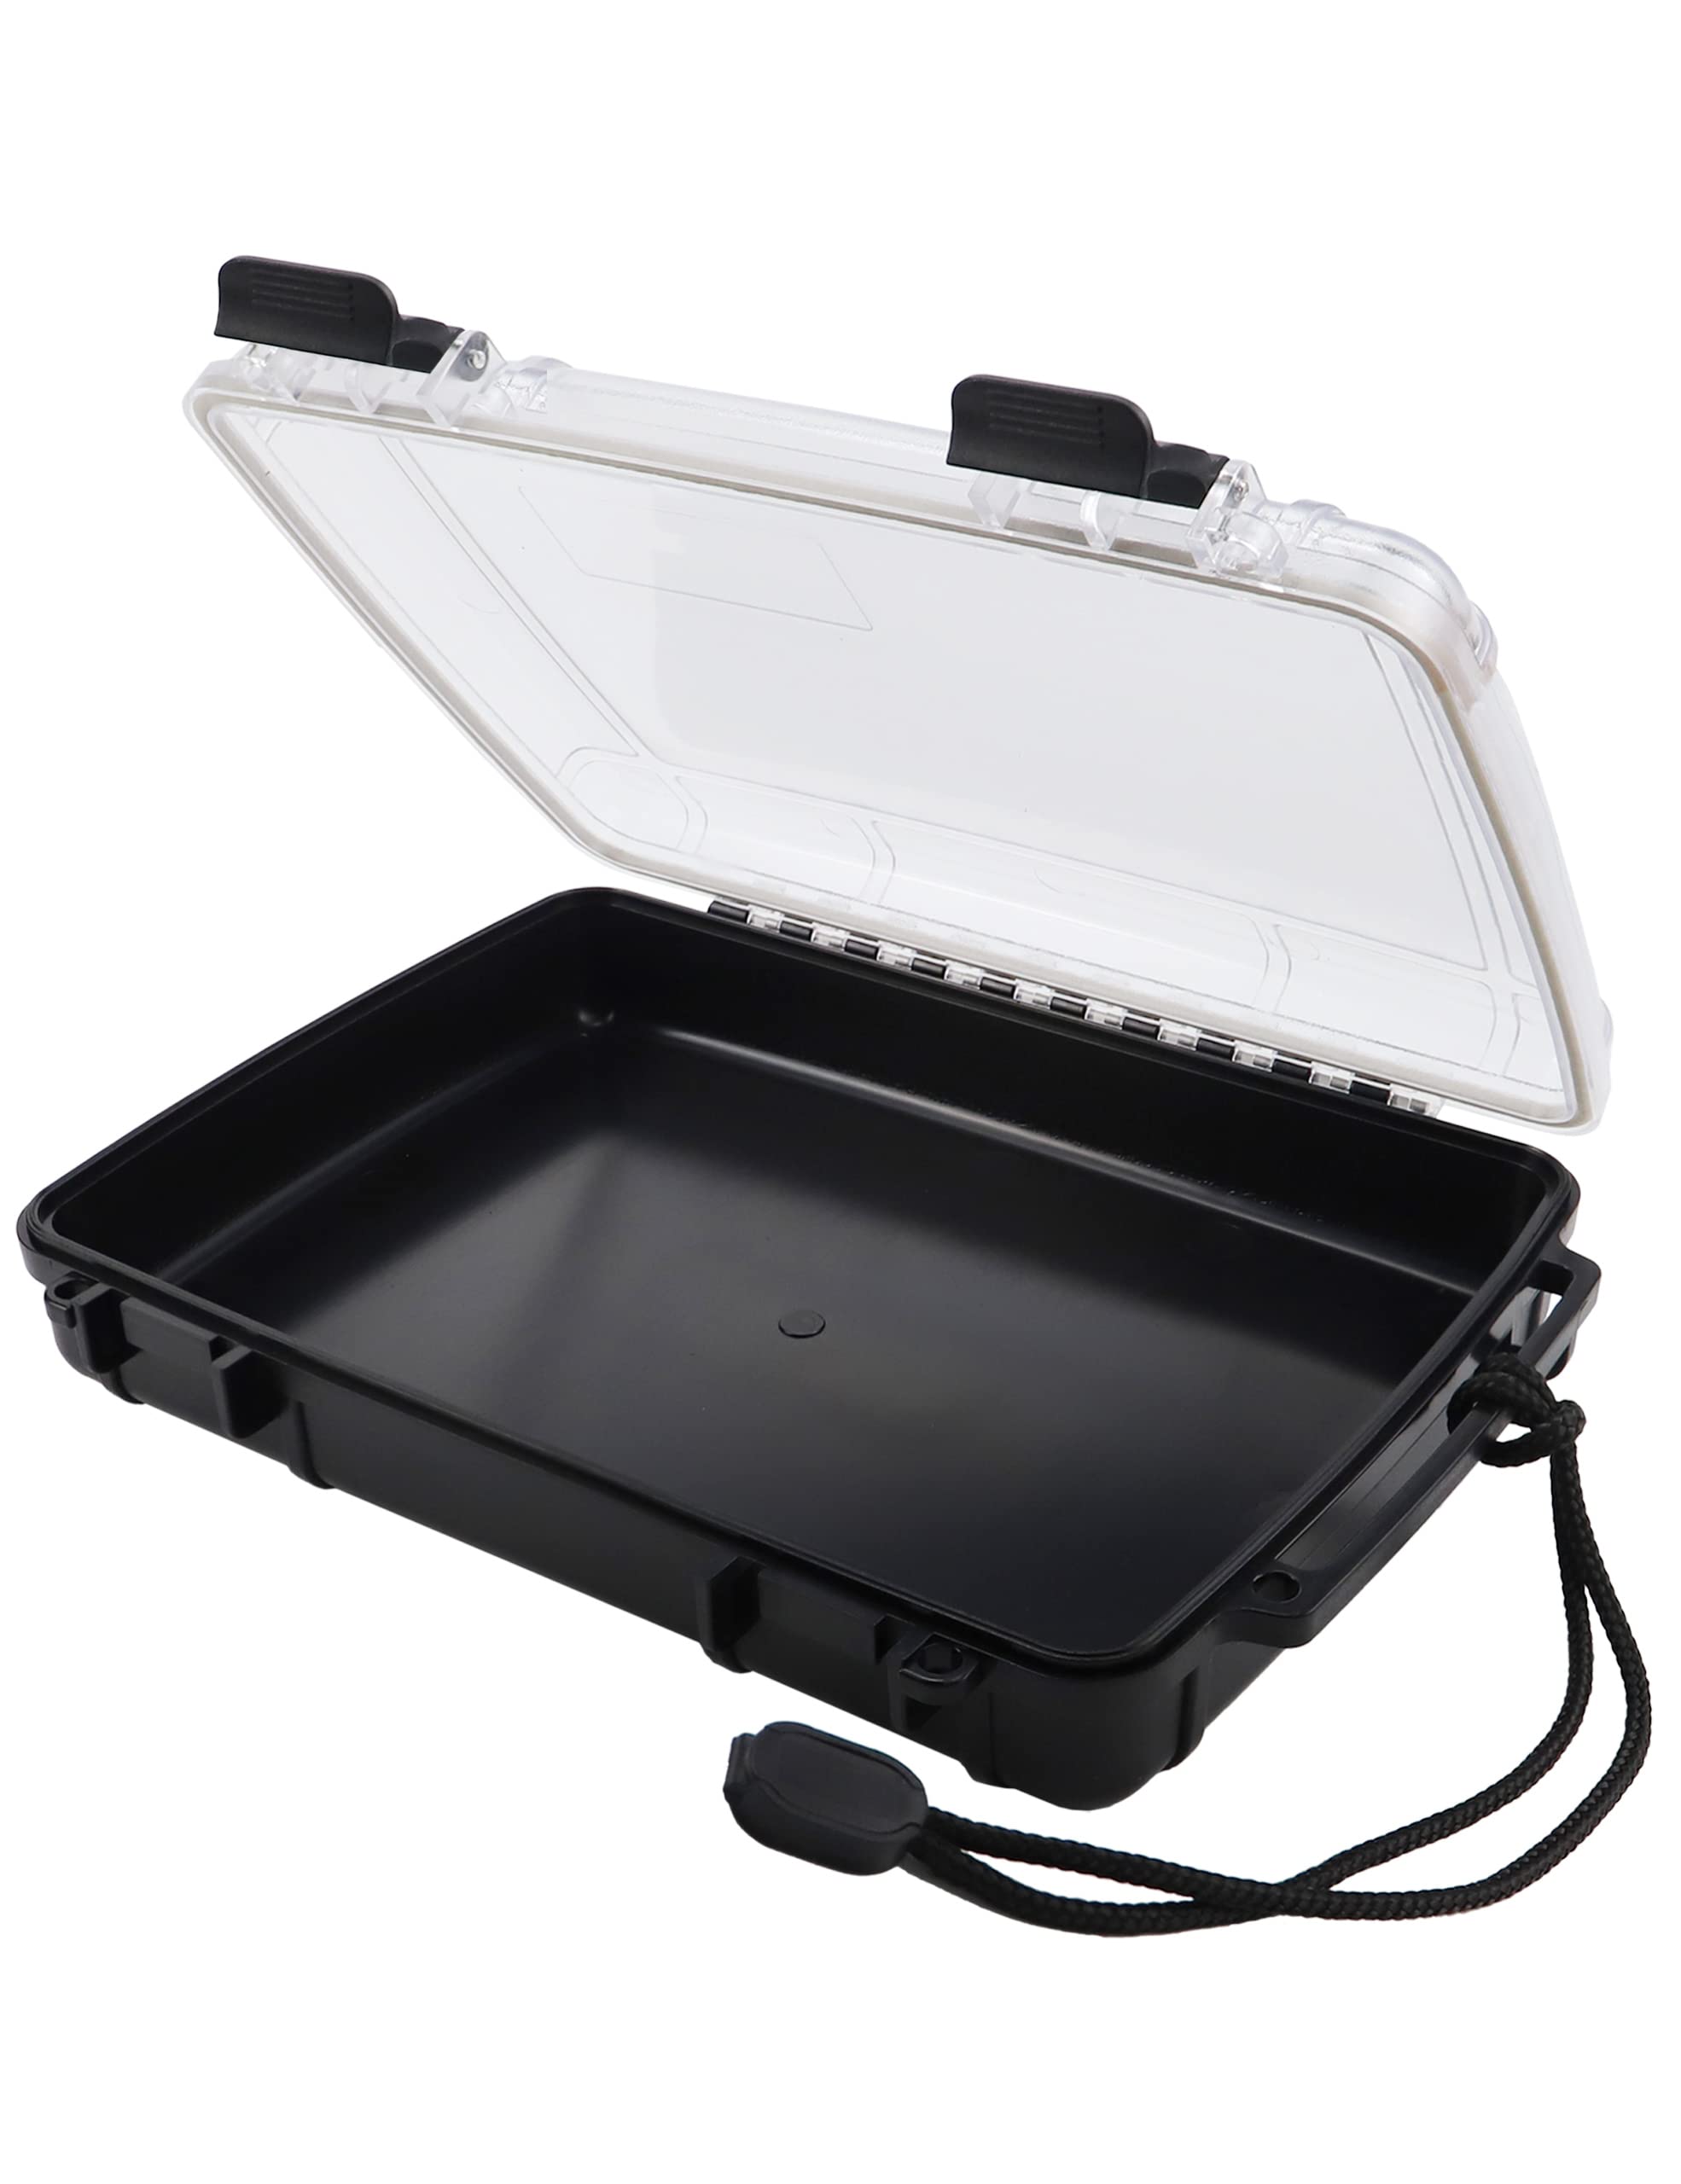 Hlotmeky Waterproof Dry Box Case Watertight Storage Containers for Kayaking  & Boating Floating Fishing Tackle Tray